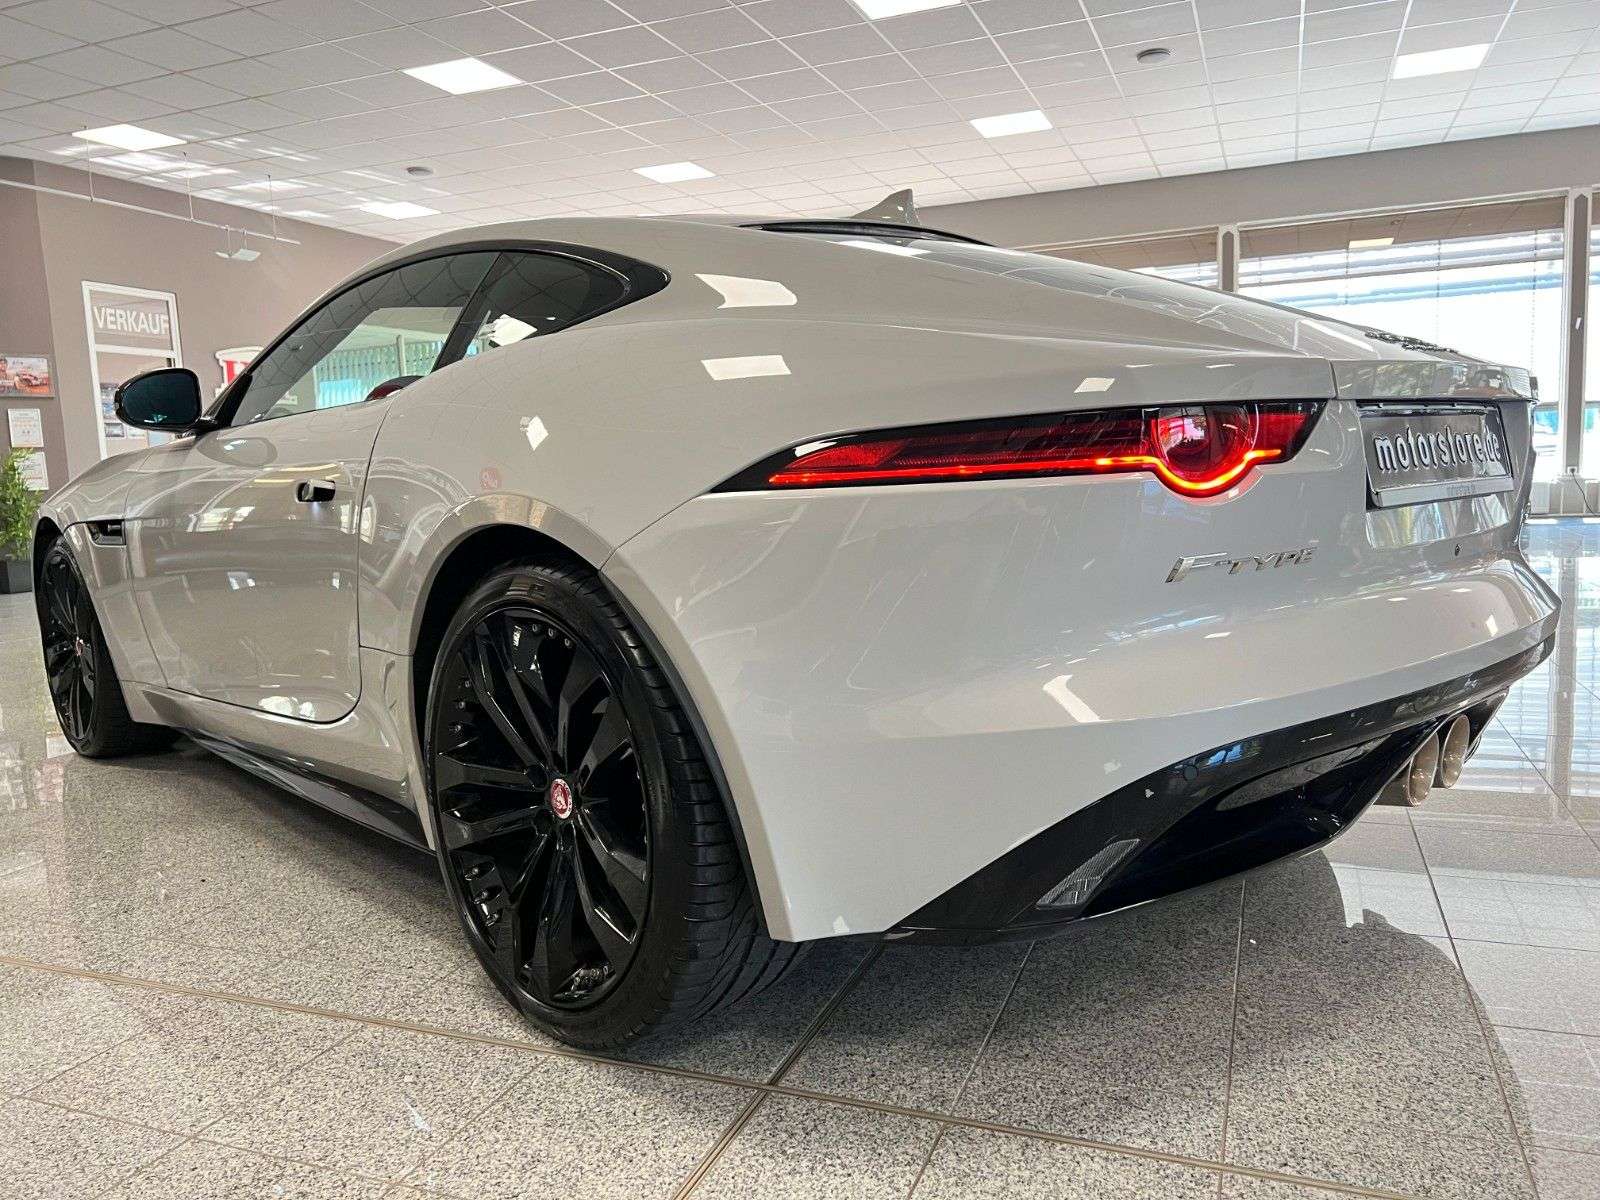 Jaguar F-Type Coupe in Grey used in Aichach for € 54,690.-